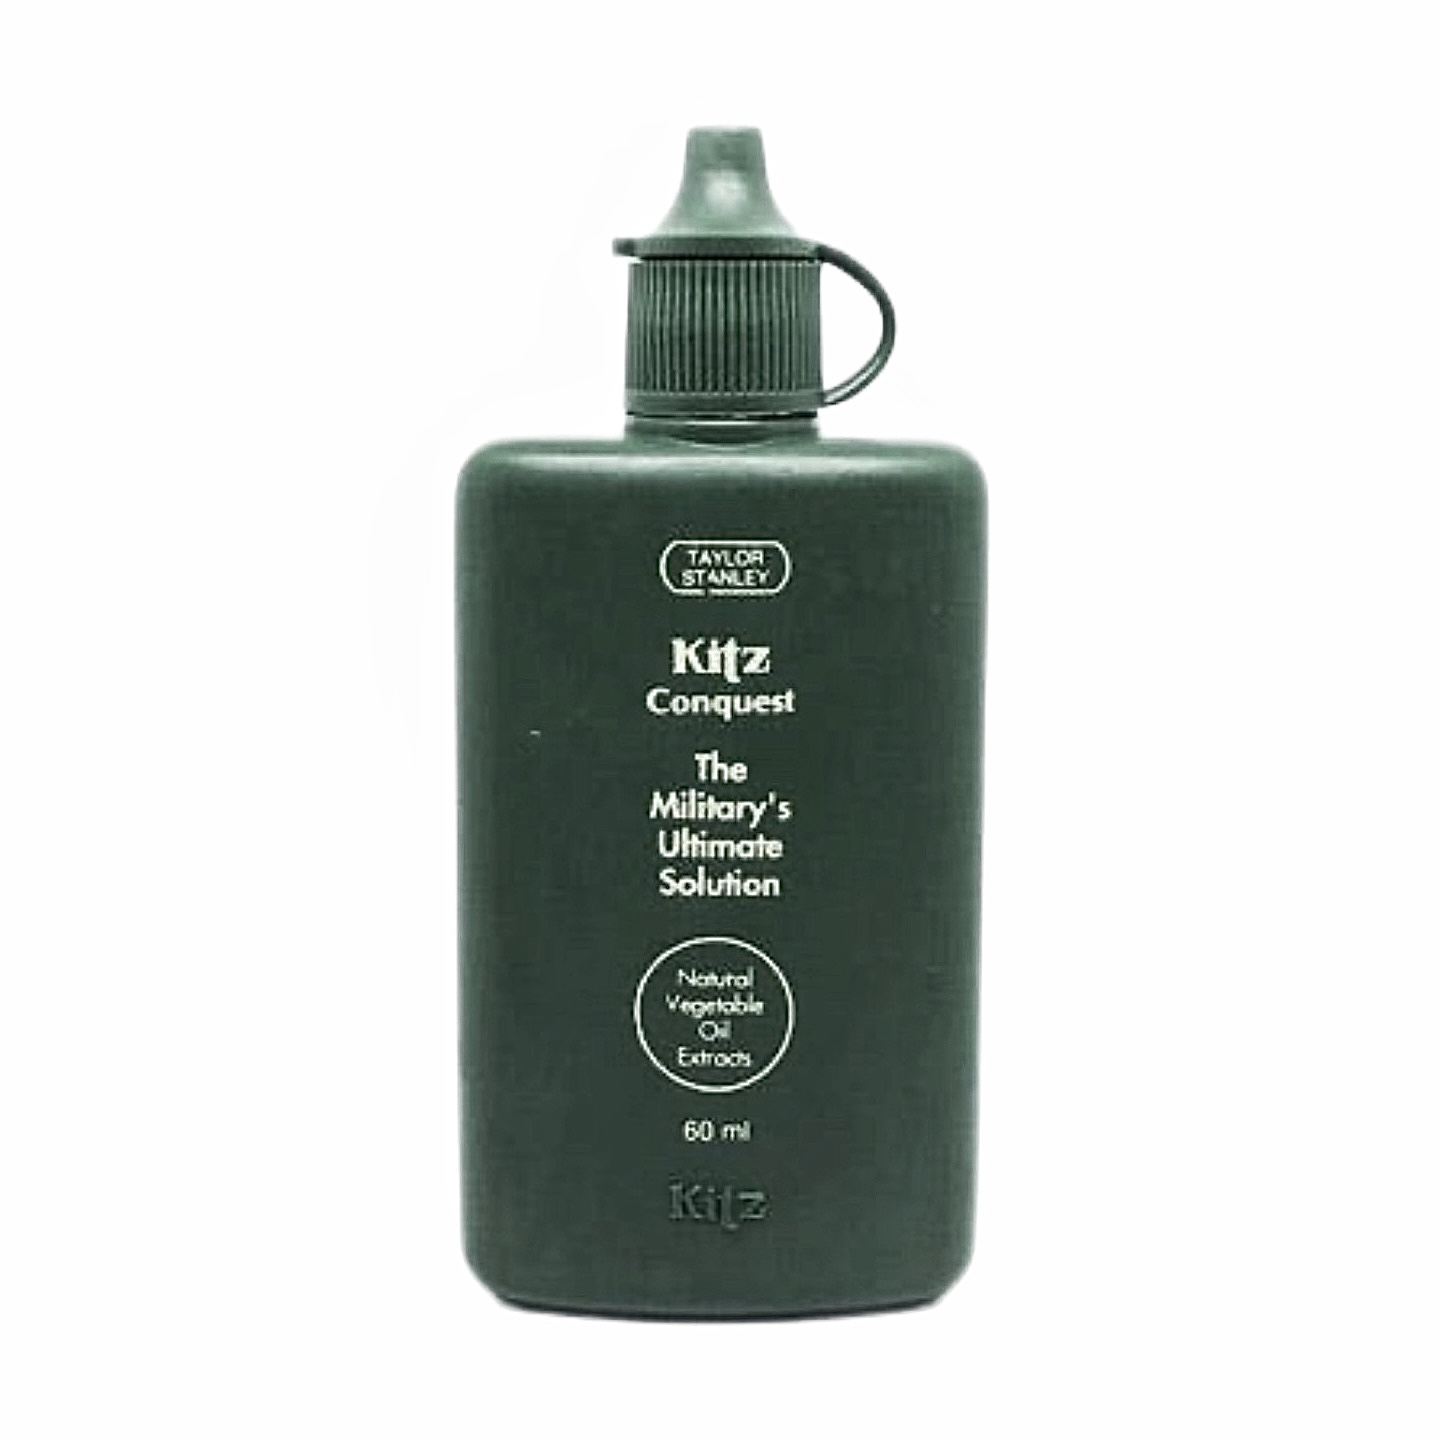 Kitz Conquest - The Military's Ultimate Solution (60ml)